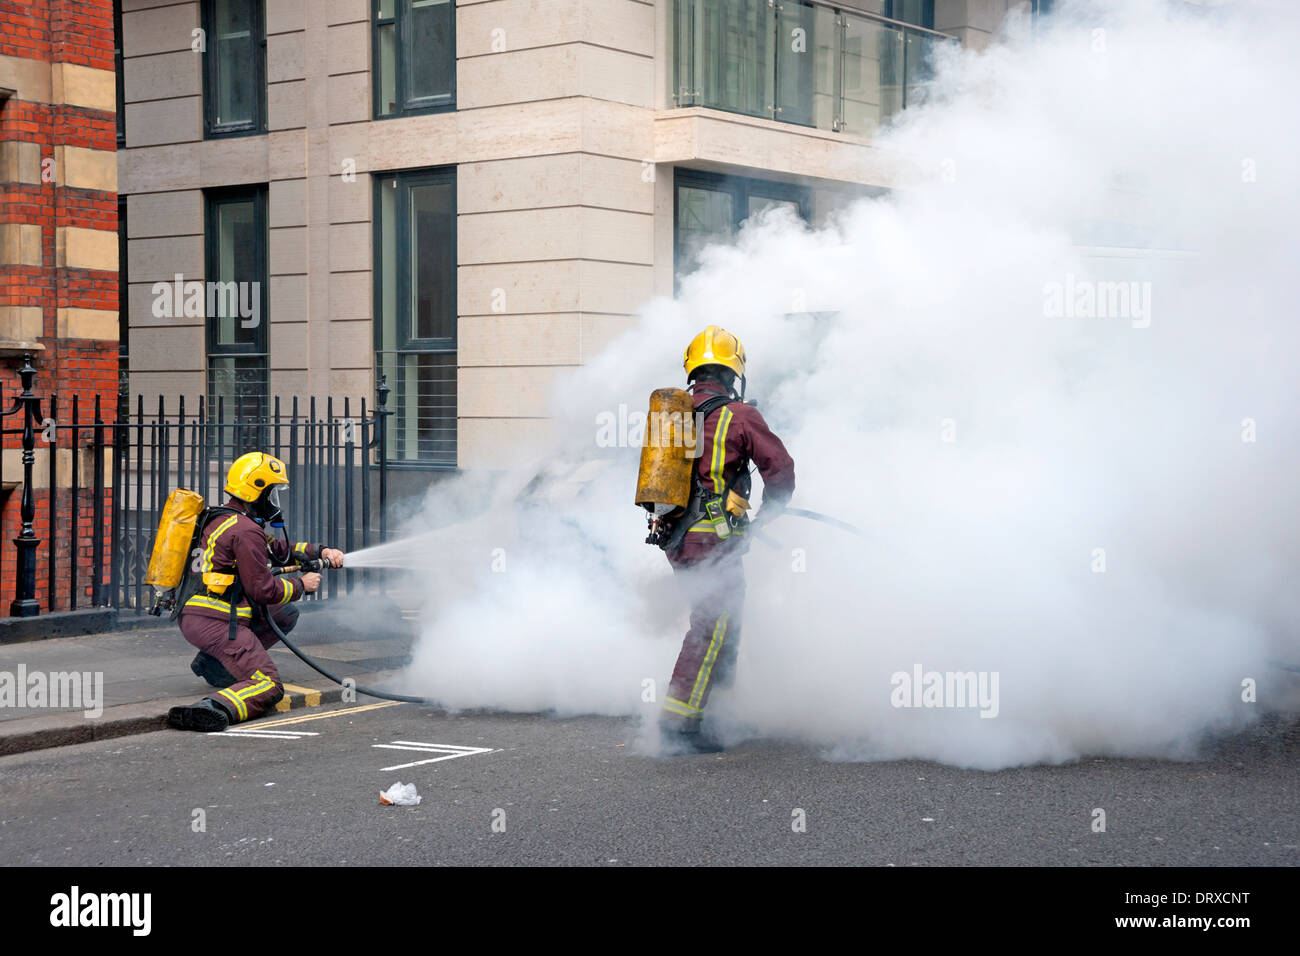 Firemen putting out a fire on a Van in a London Street Stock Photo